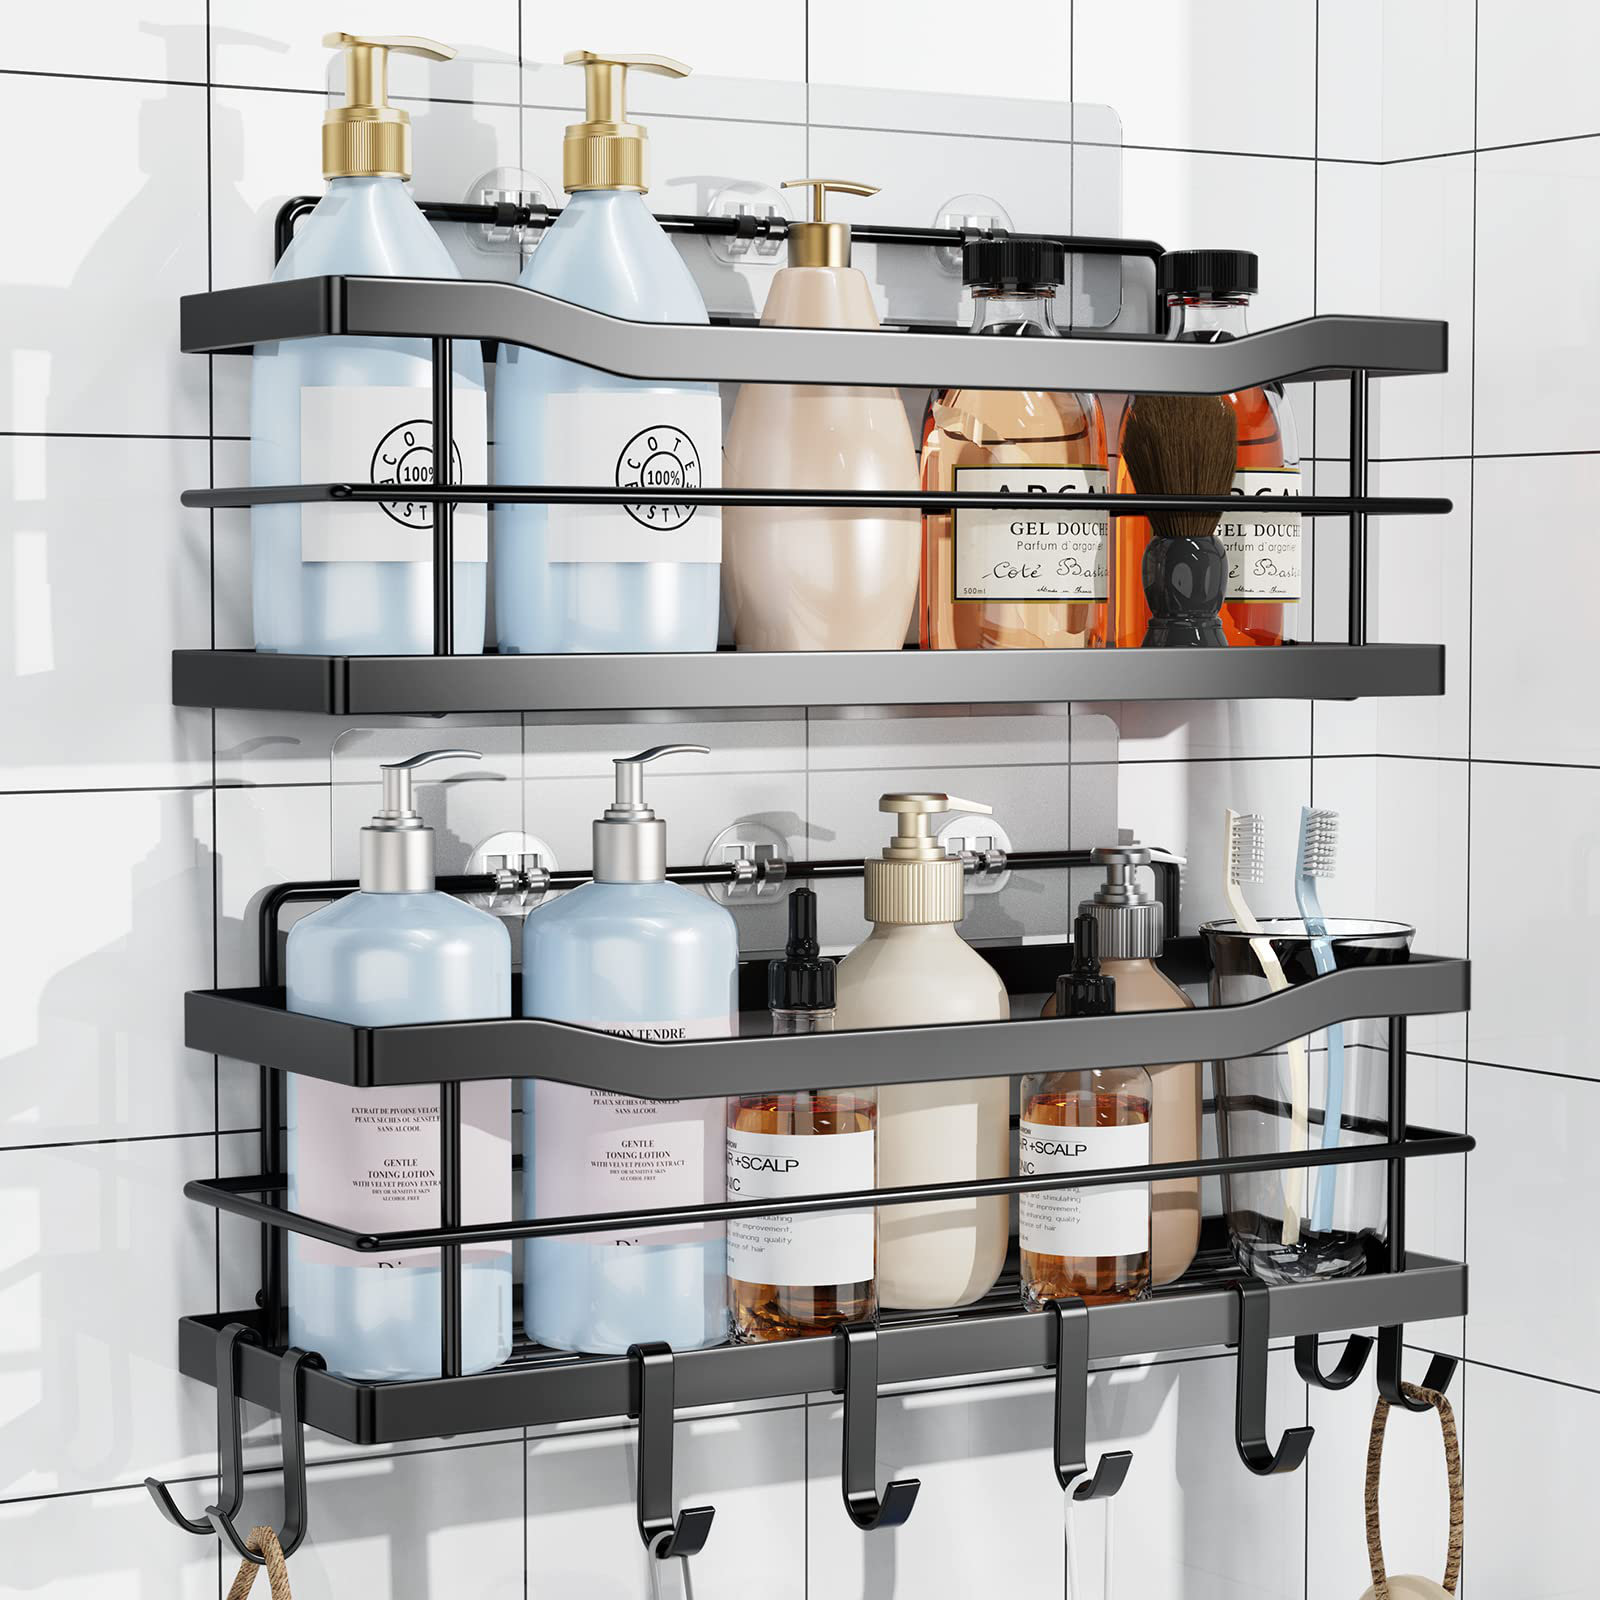 Rebrilliant Lainhart Suction Stainless Steel Shower Caddy & Reviews